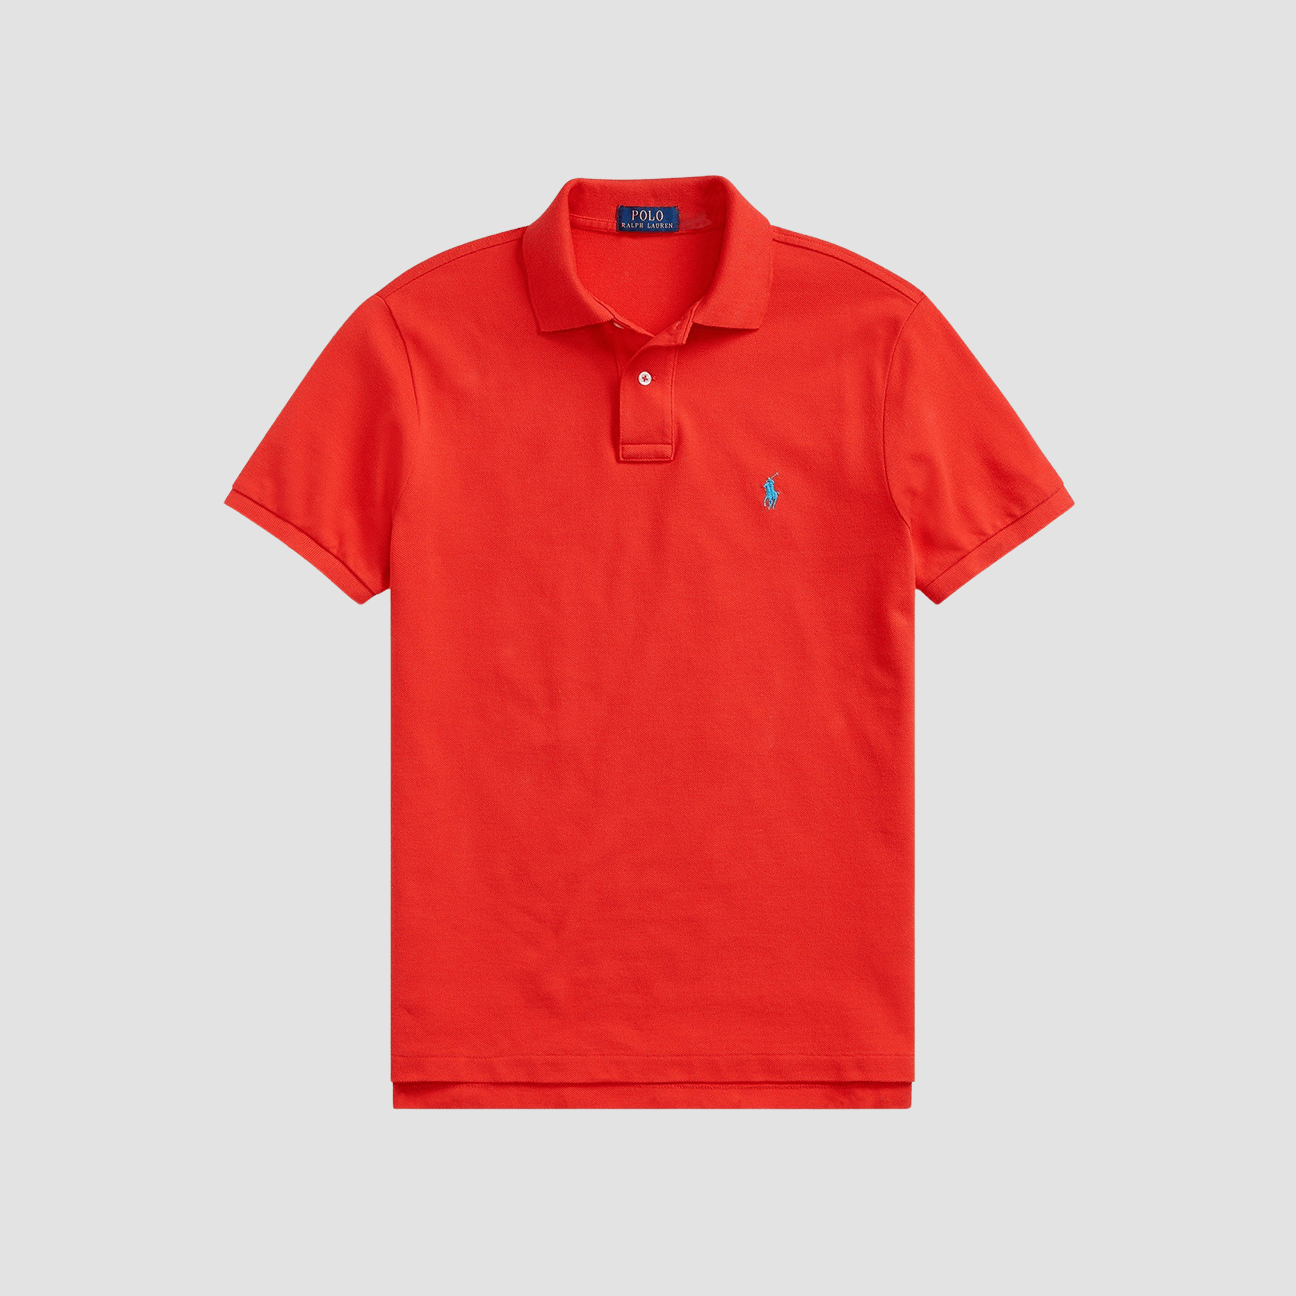 Slim-fit men's polo shirt in breathable cotton